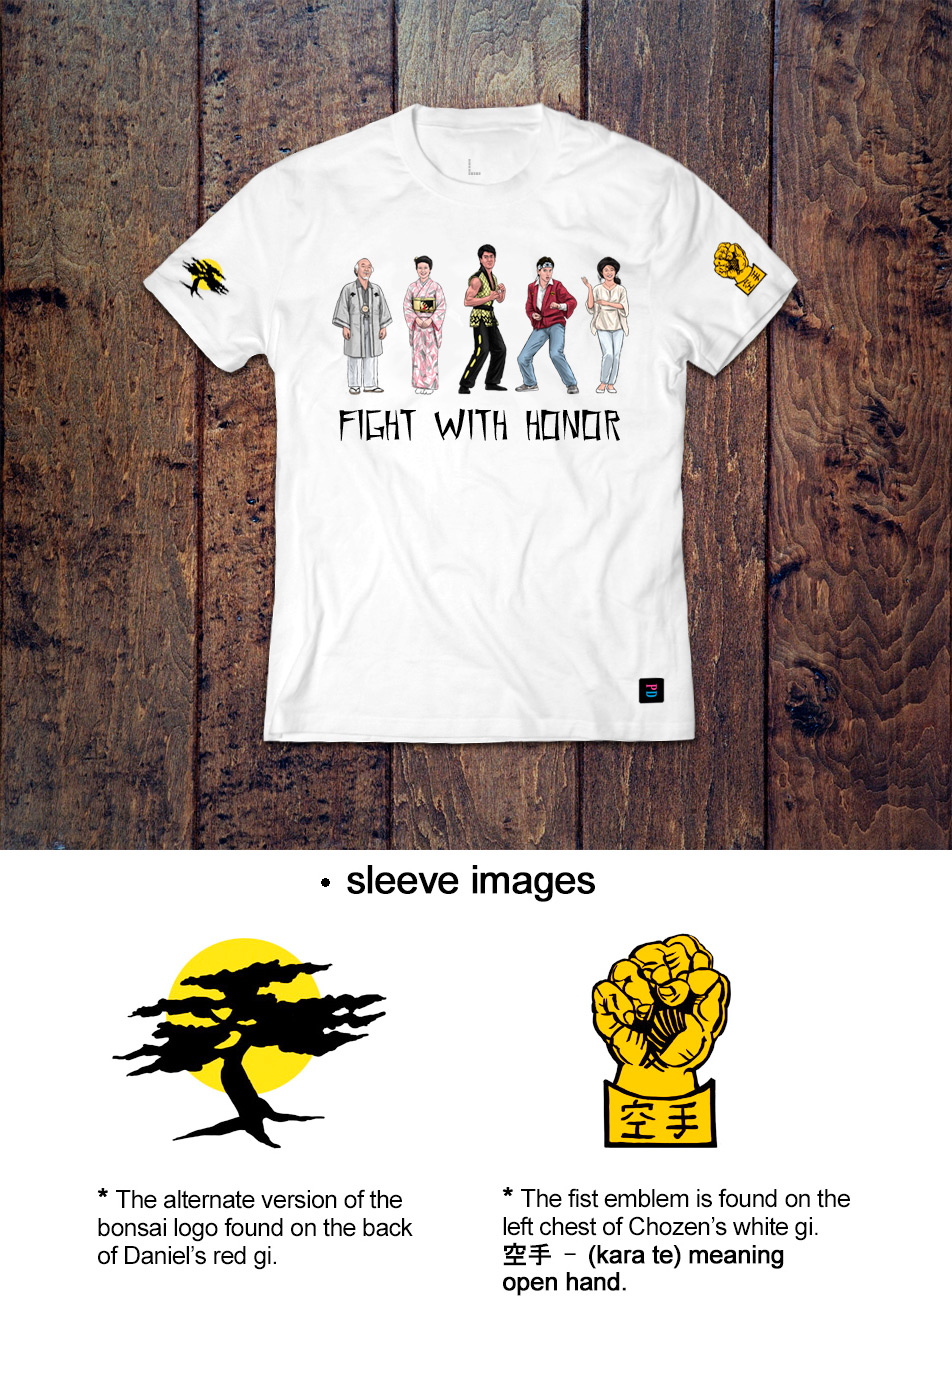 Fight With Honor t-shirt design by Marten Go aka MGO